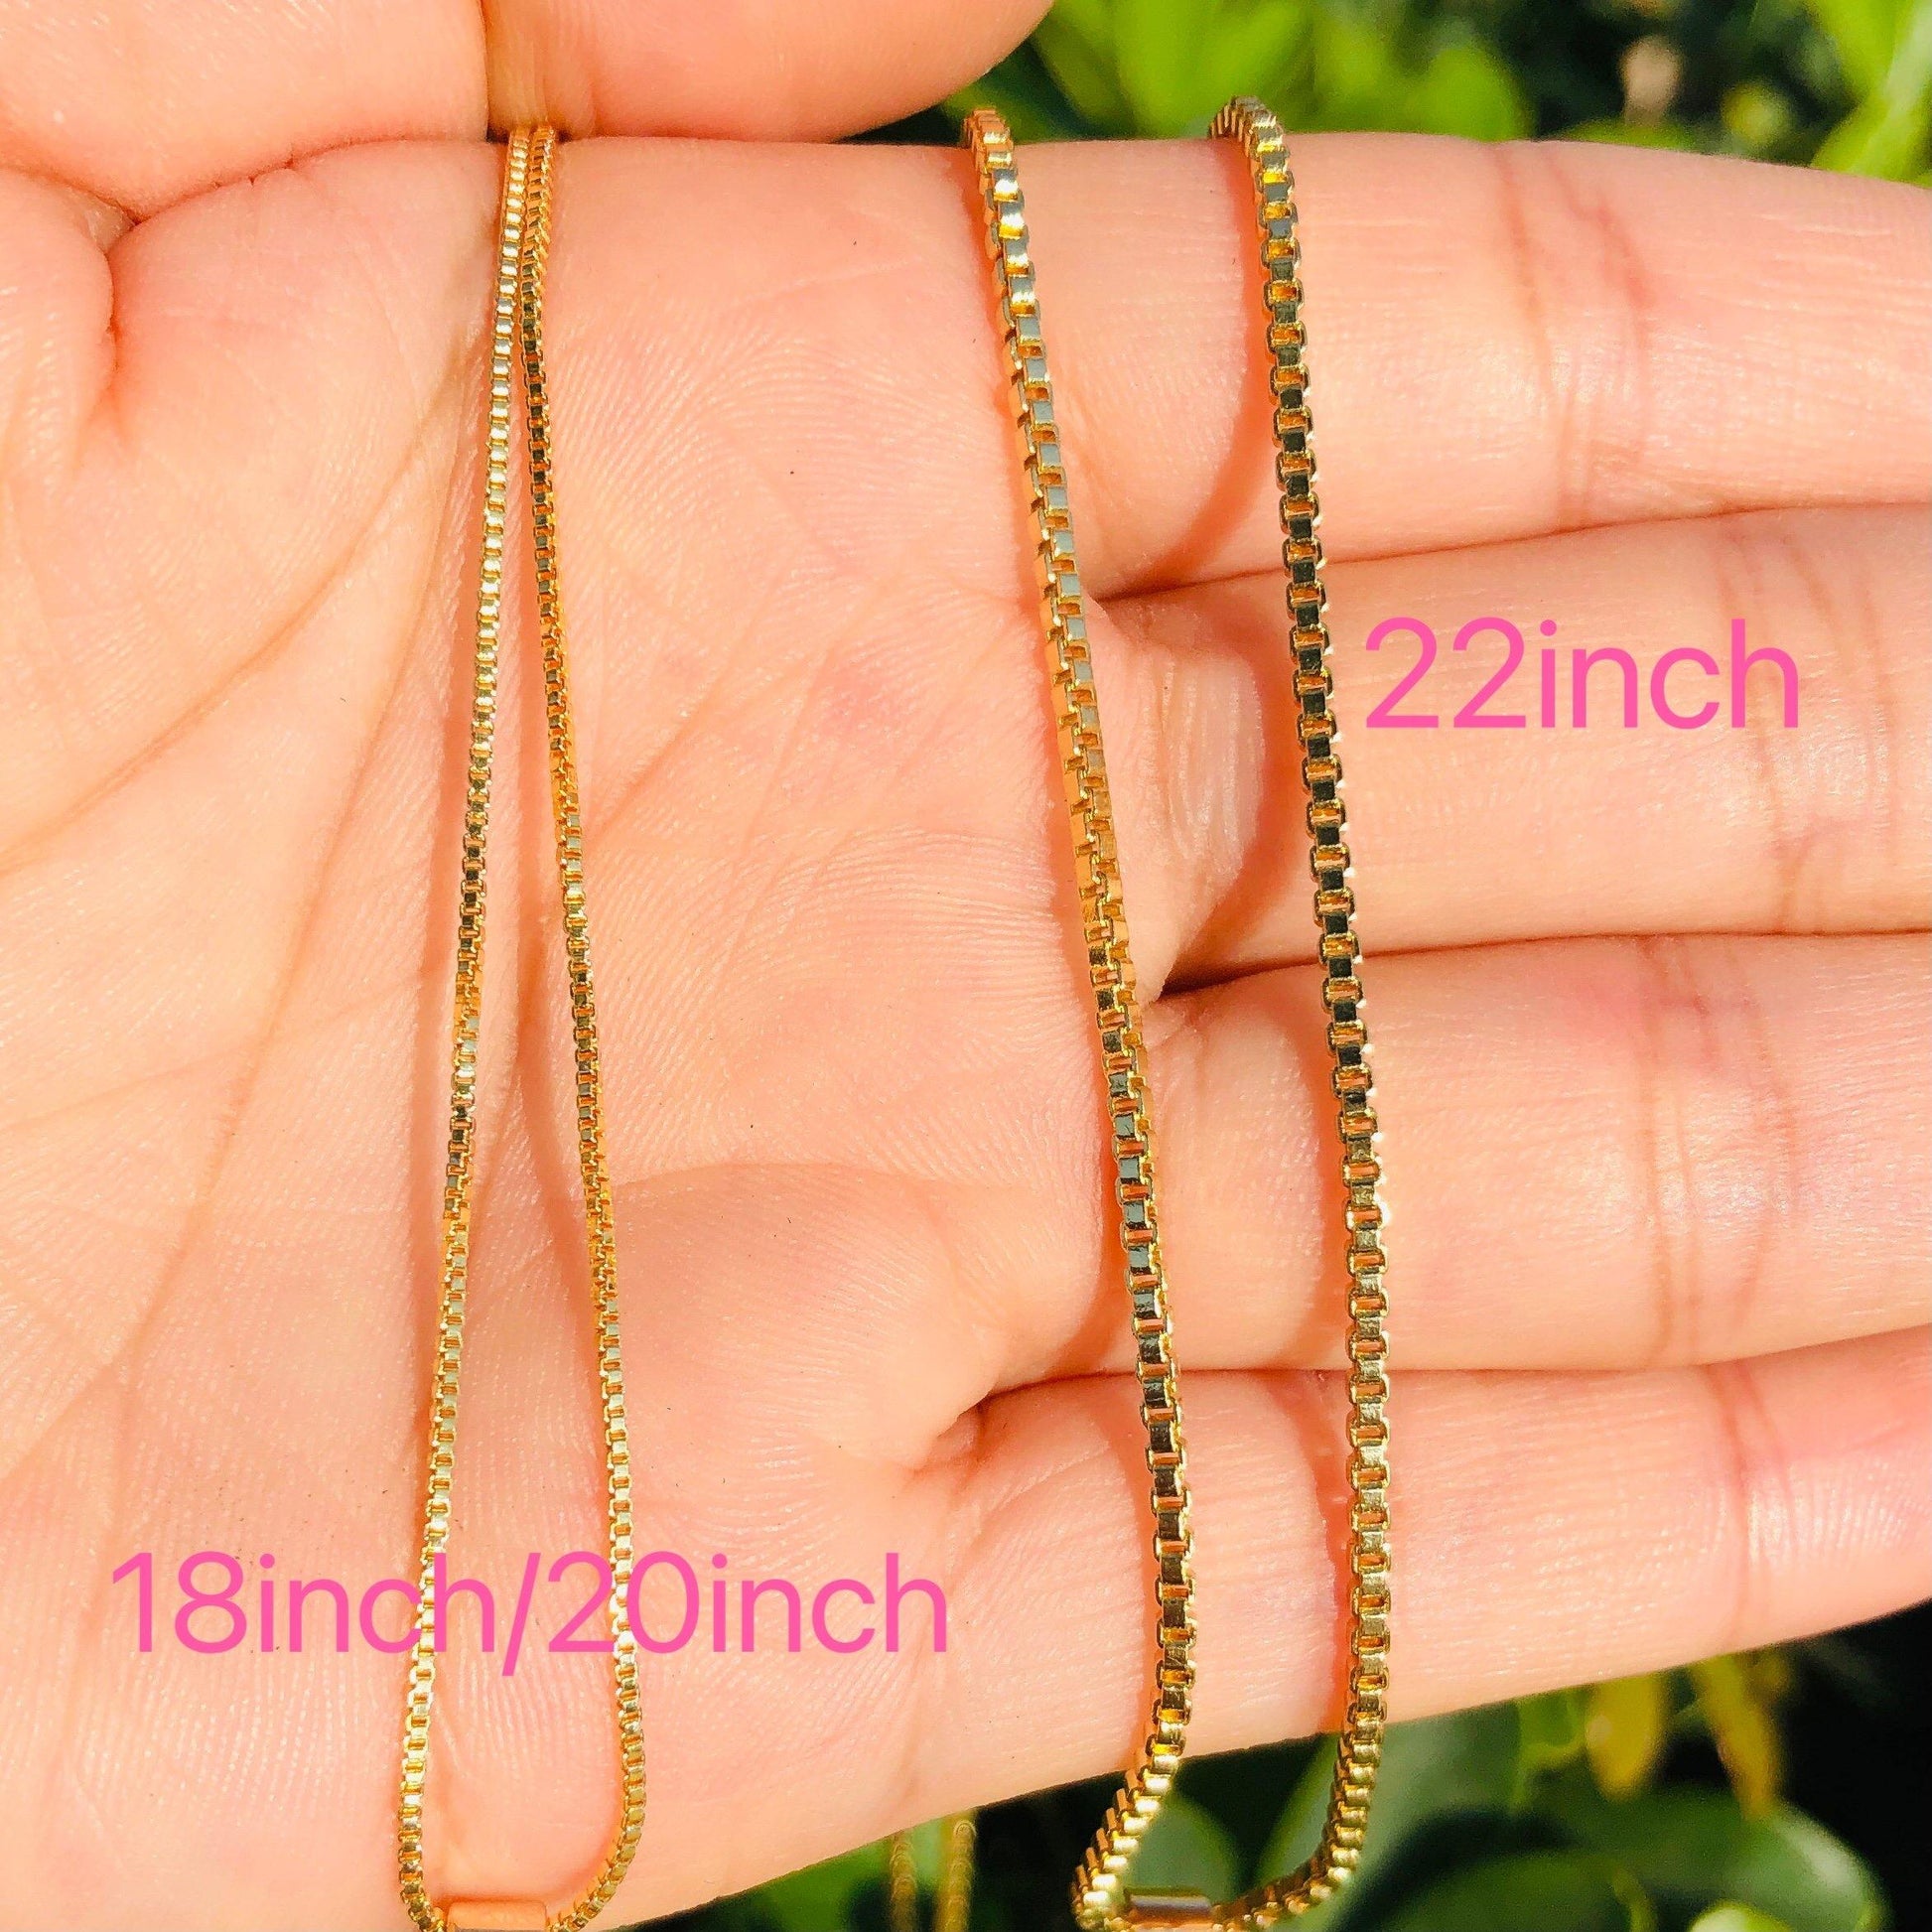 5pcs/lot 47*26mm CZ Paved Cross Necklace Necklaces Charms Beads Beyond